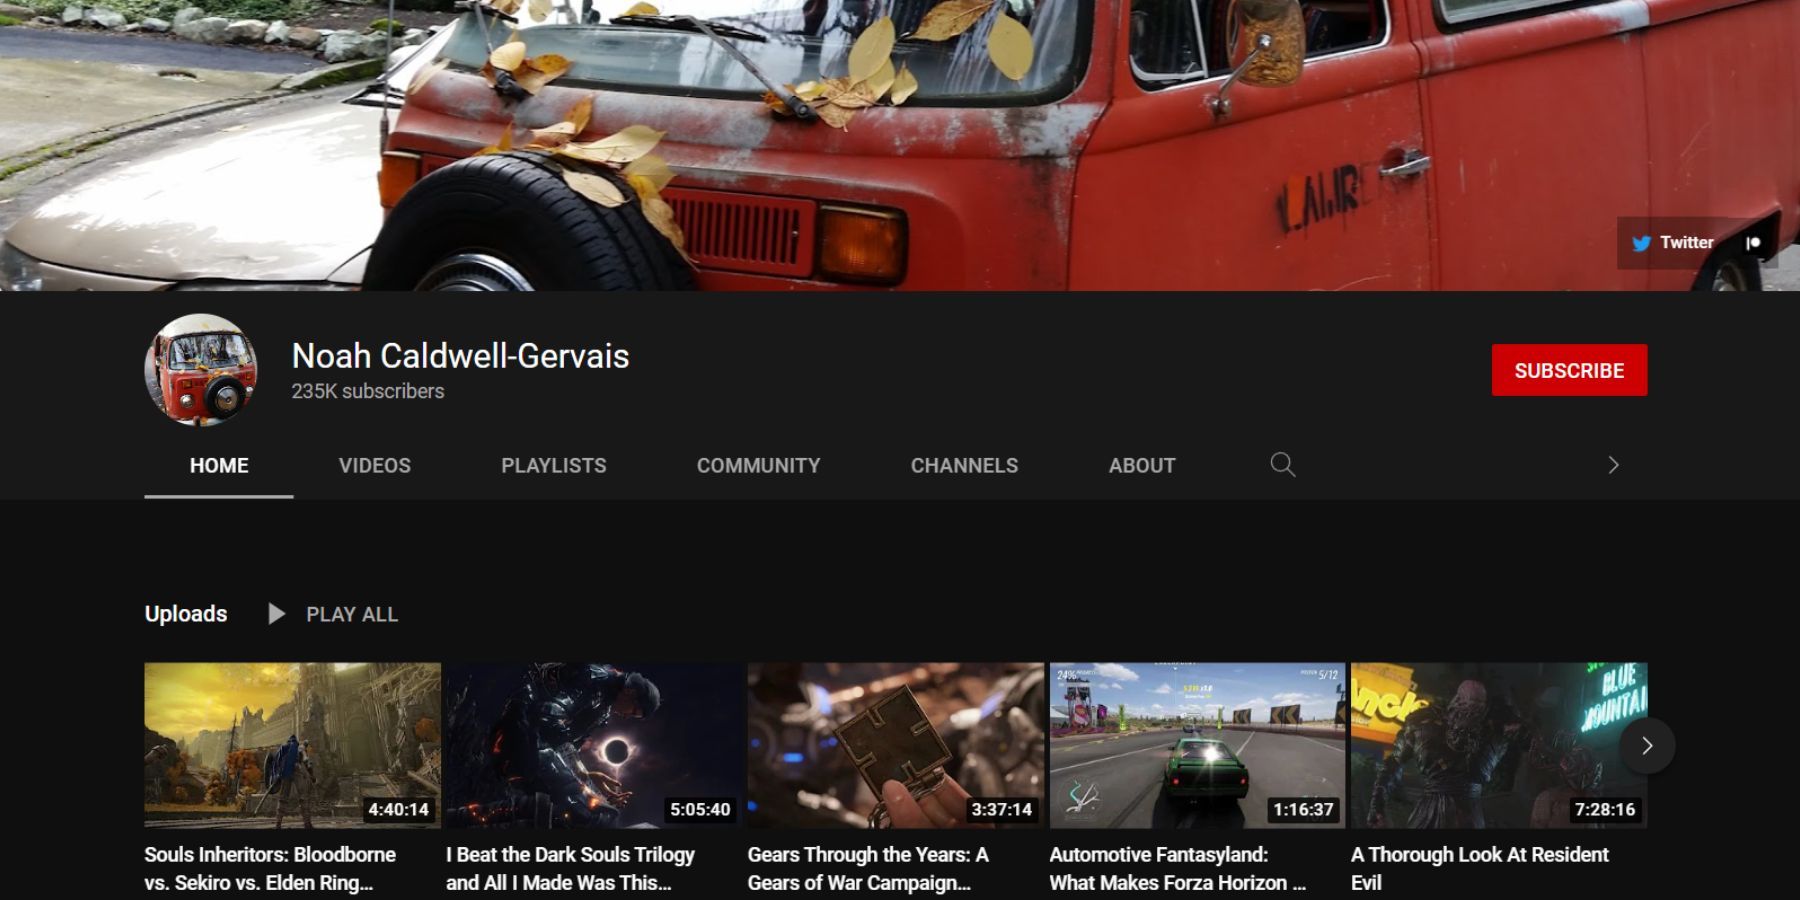 Channel page for Noah Caldwell-Gervais on YouTube